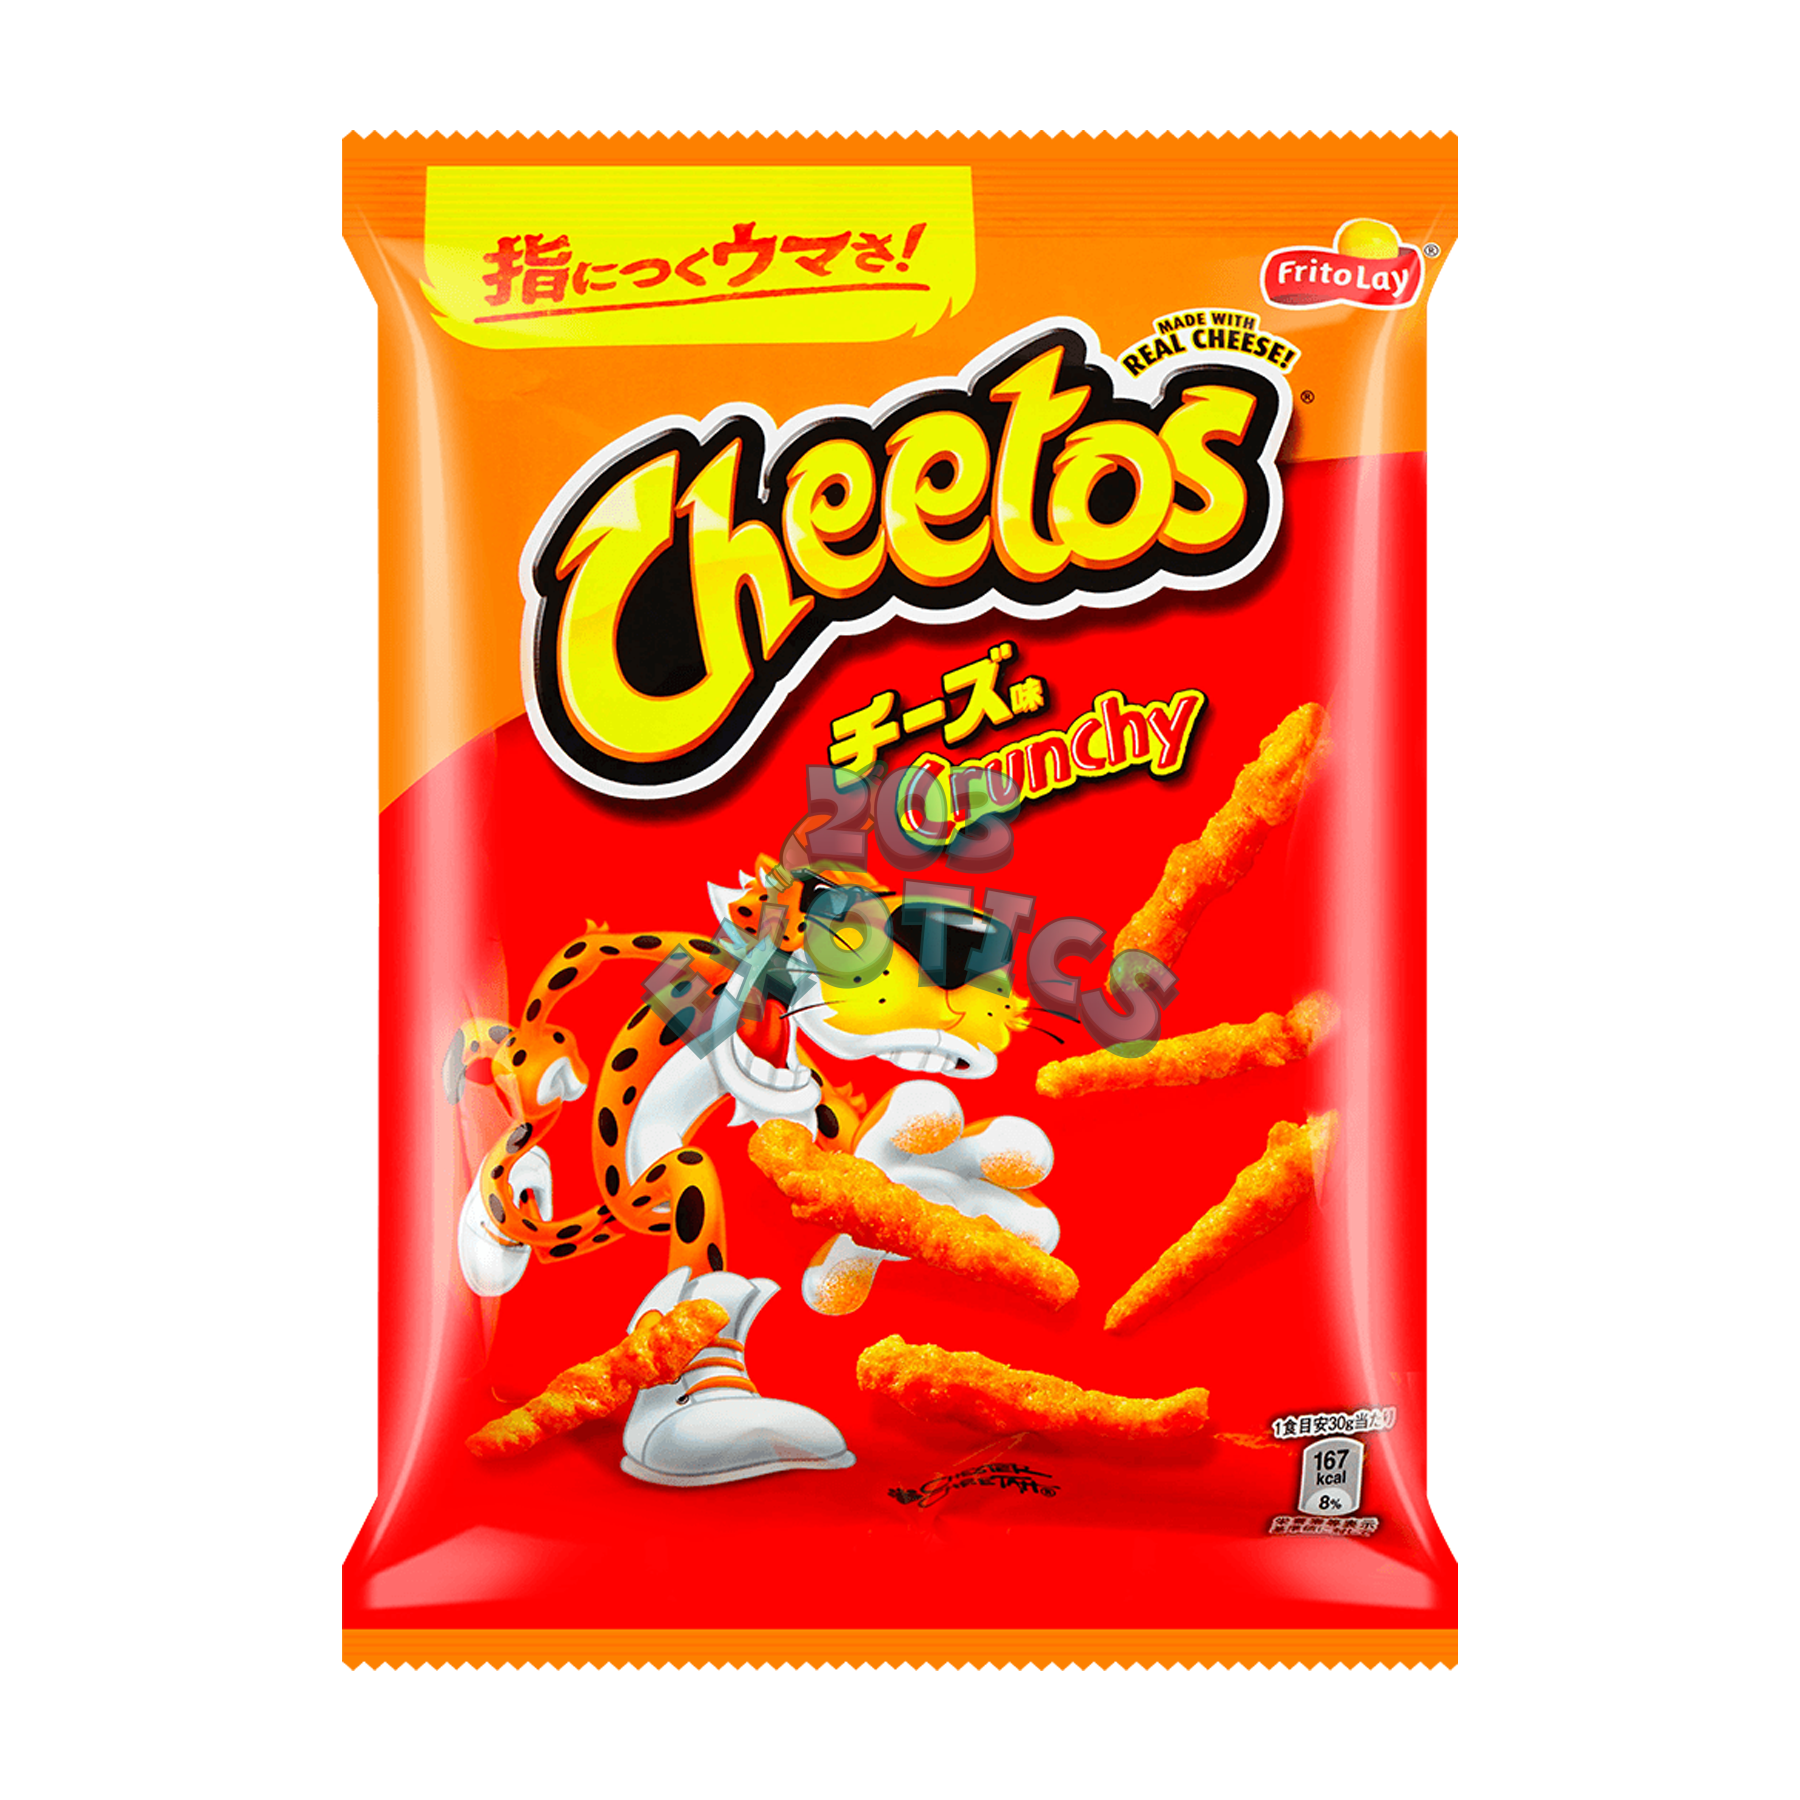 Cheetos Crunchy Cheese Flavored Snack (65G) (Japan)